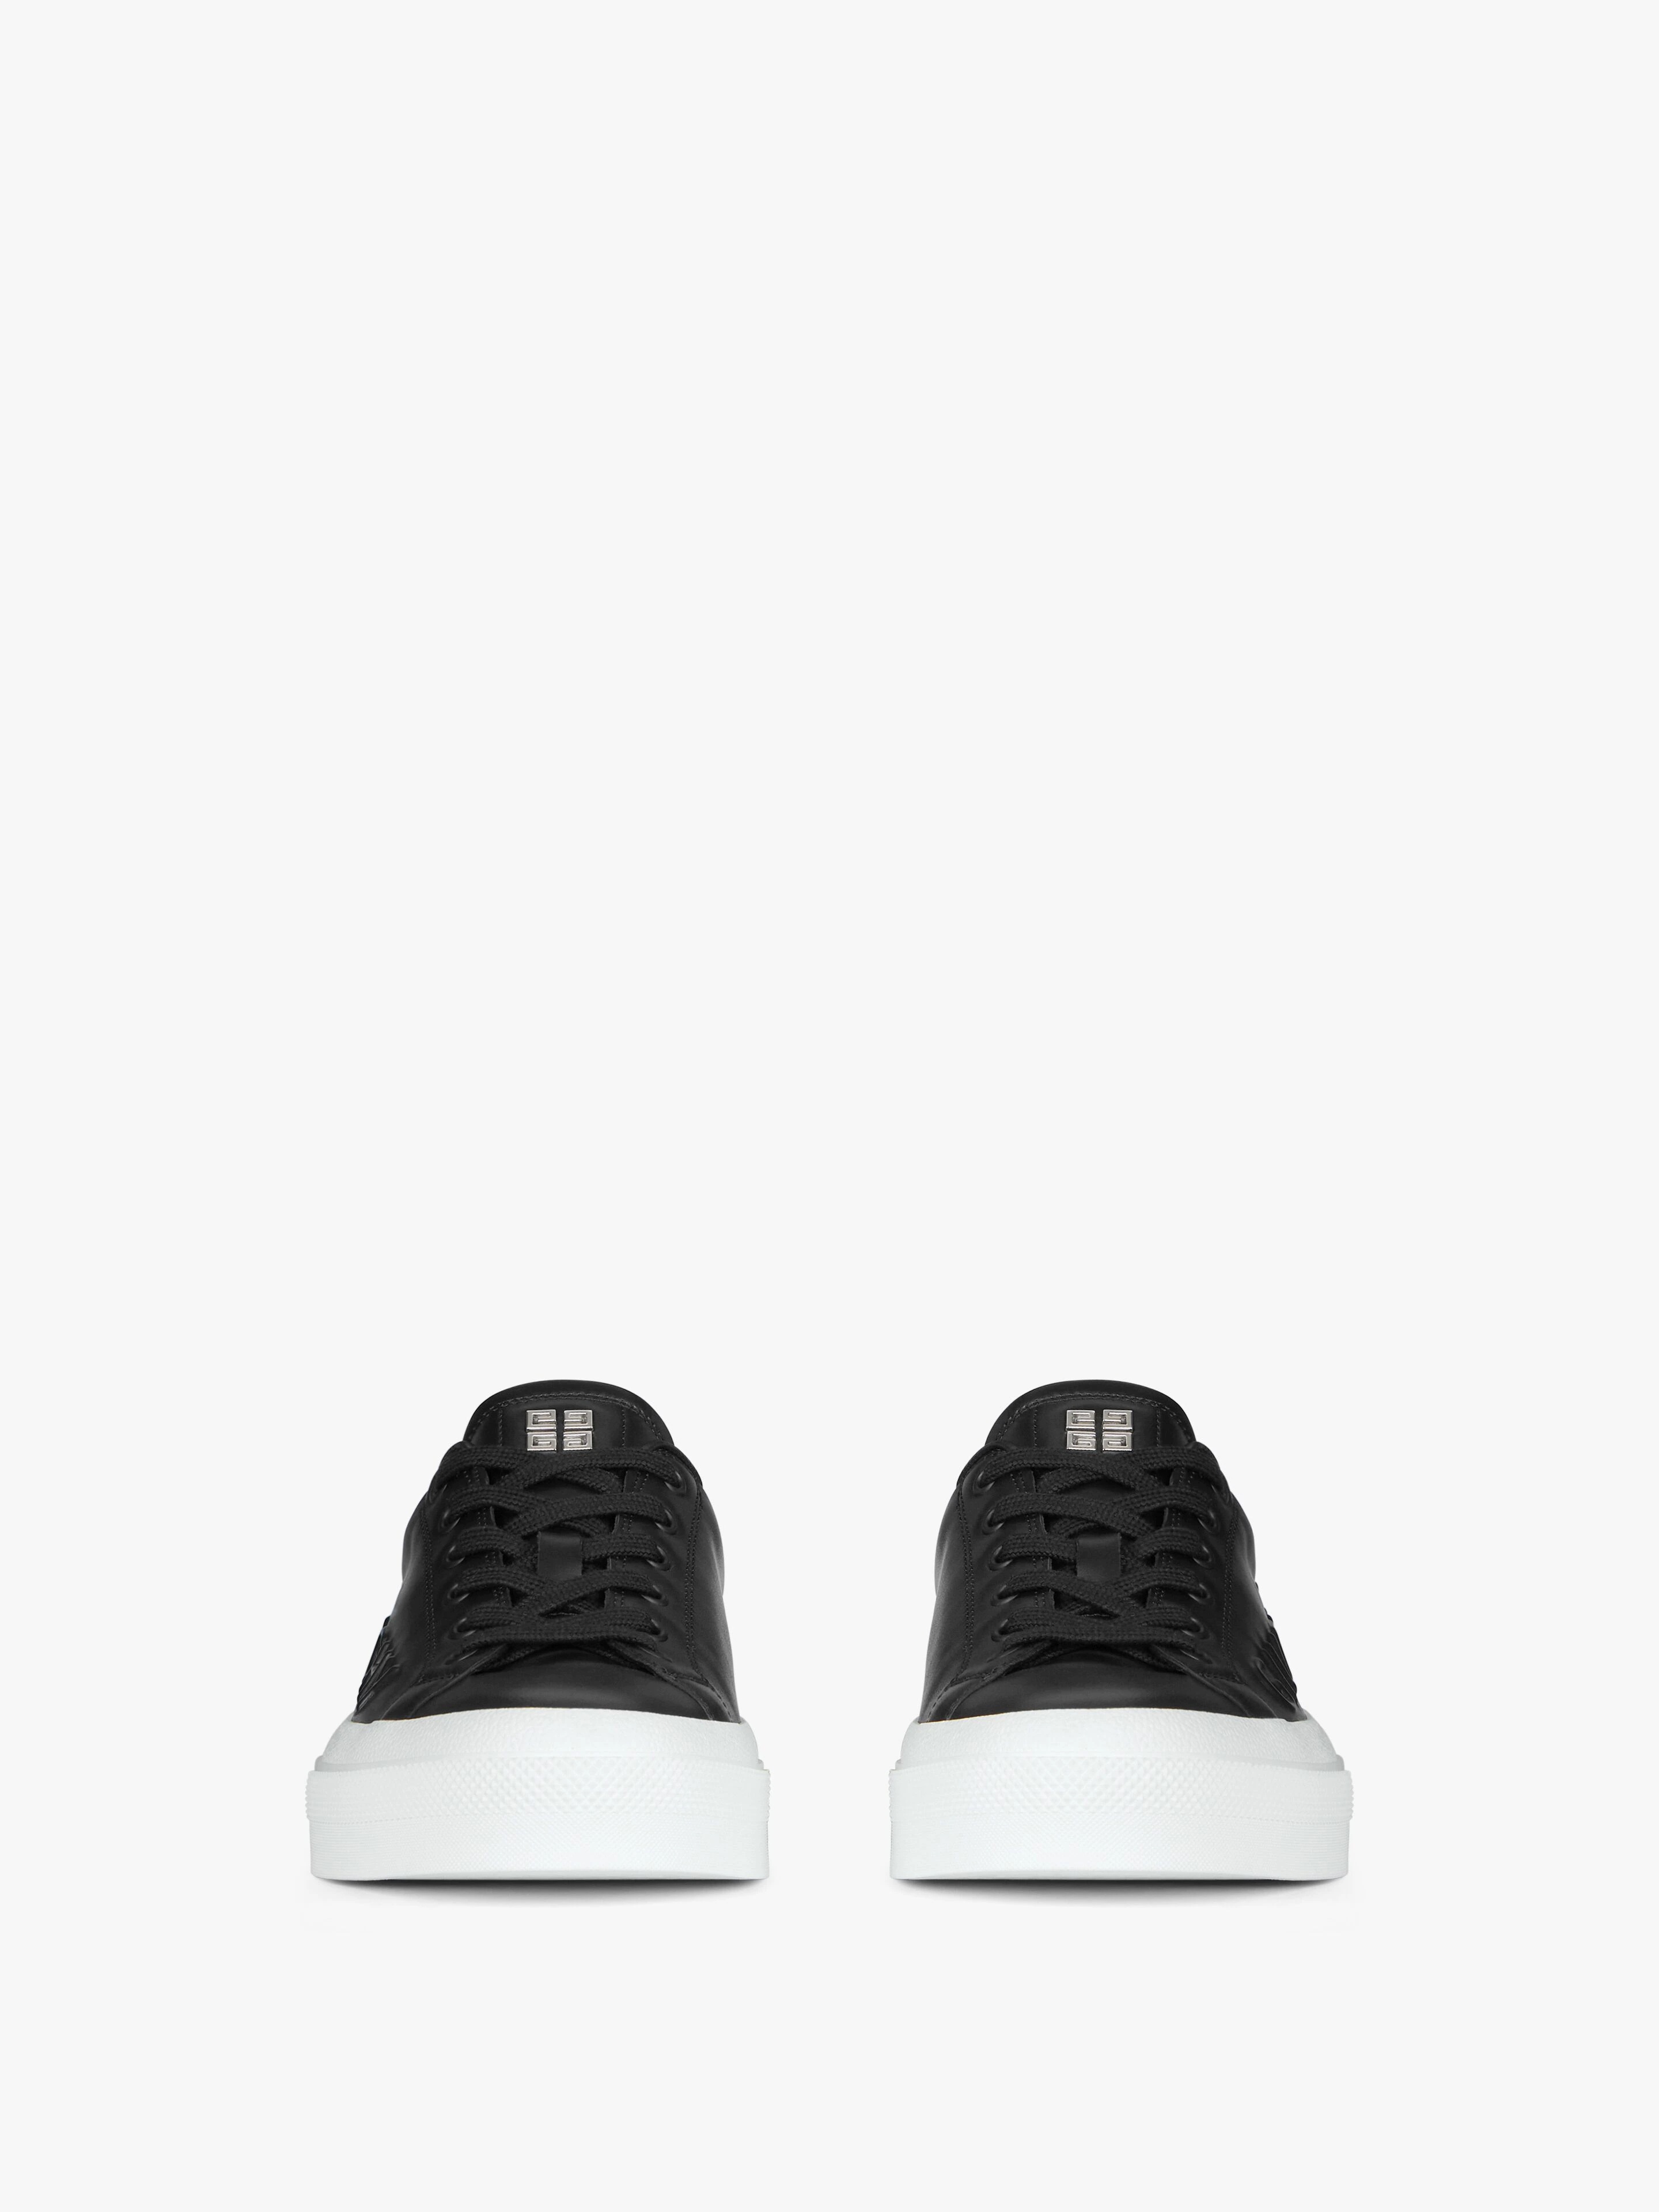 CITY SPORT SNEAKERS IN GIVENCHY LEATHER - 2